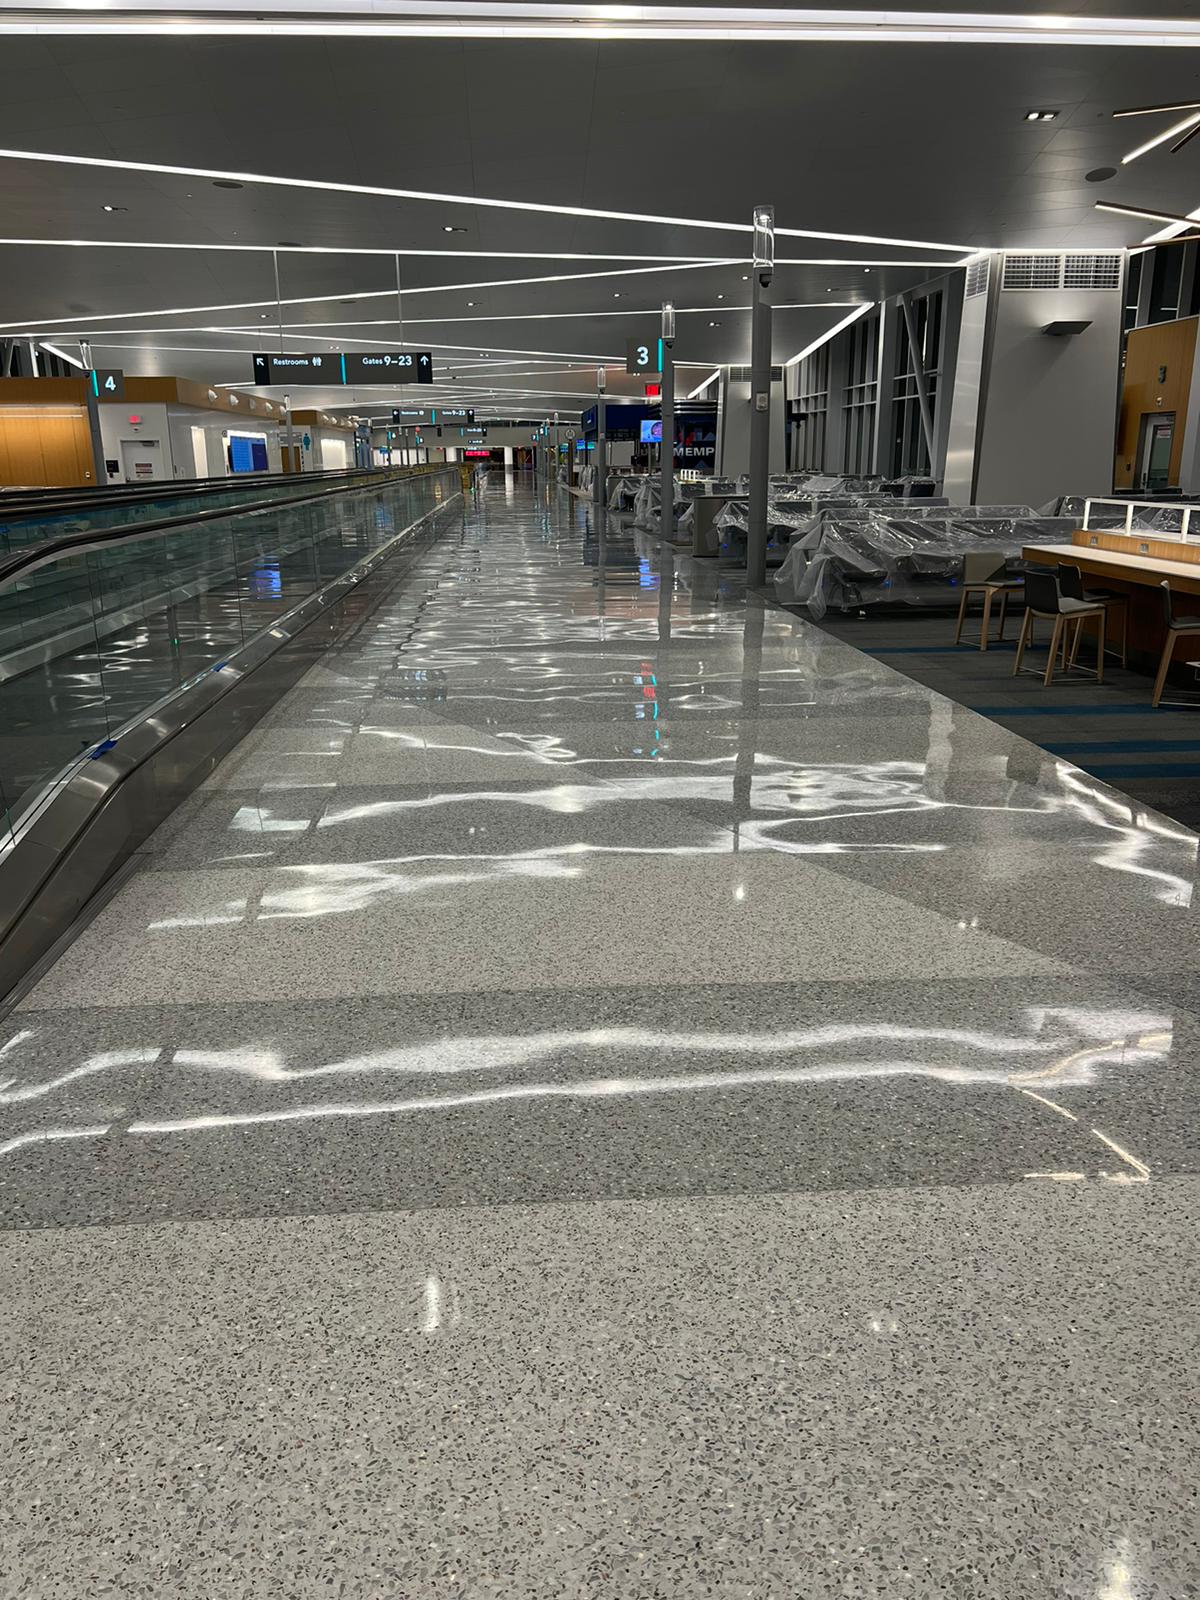 providing Cleaning service at airport